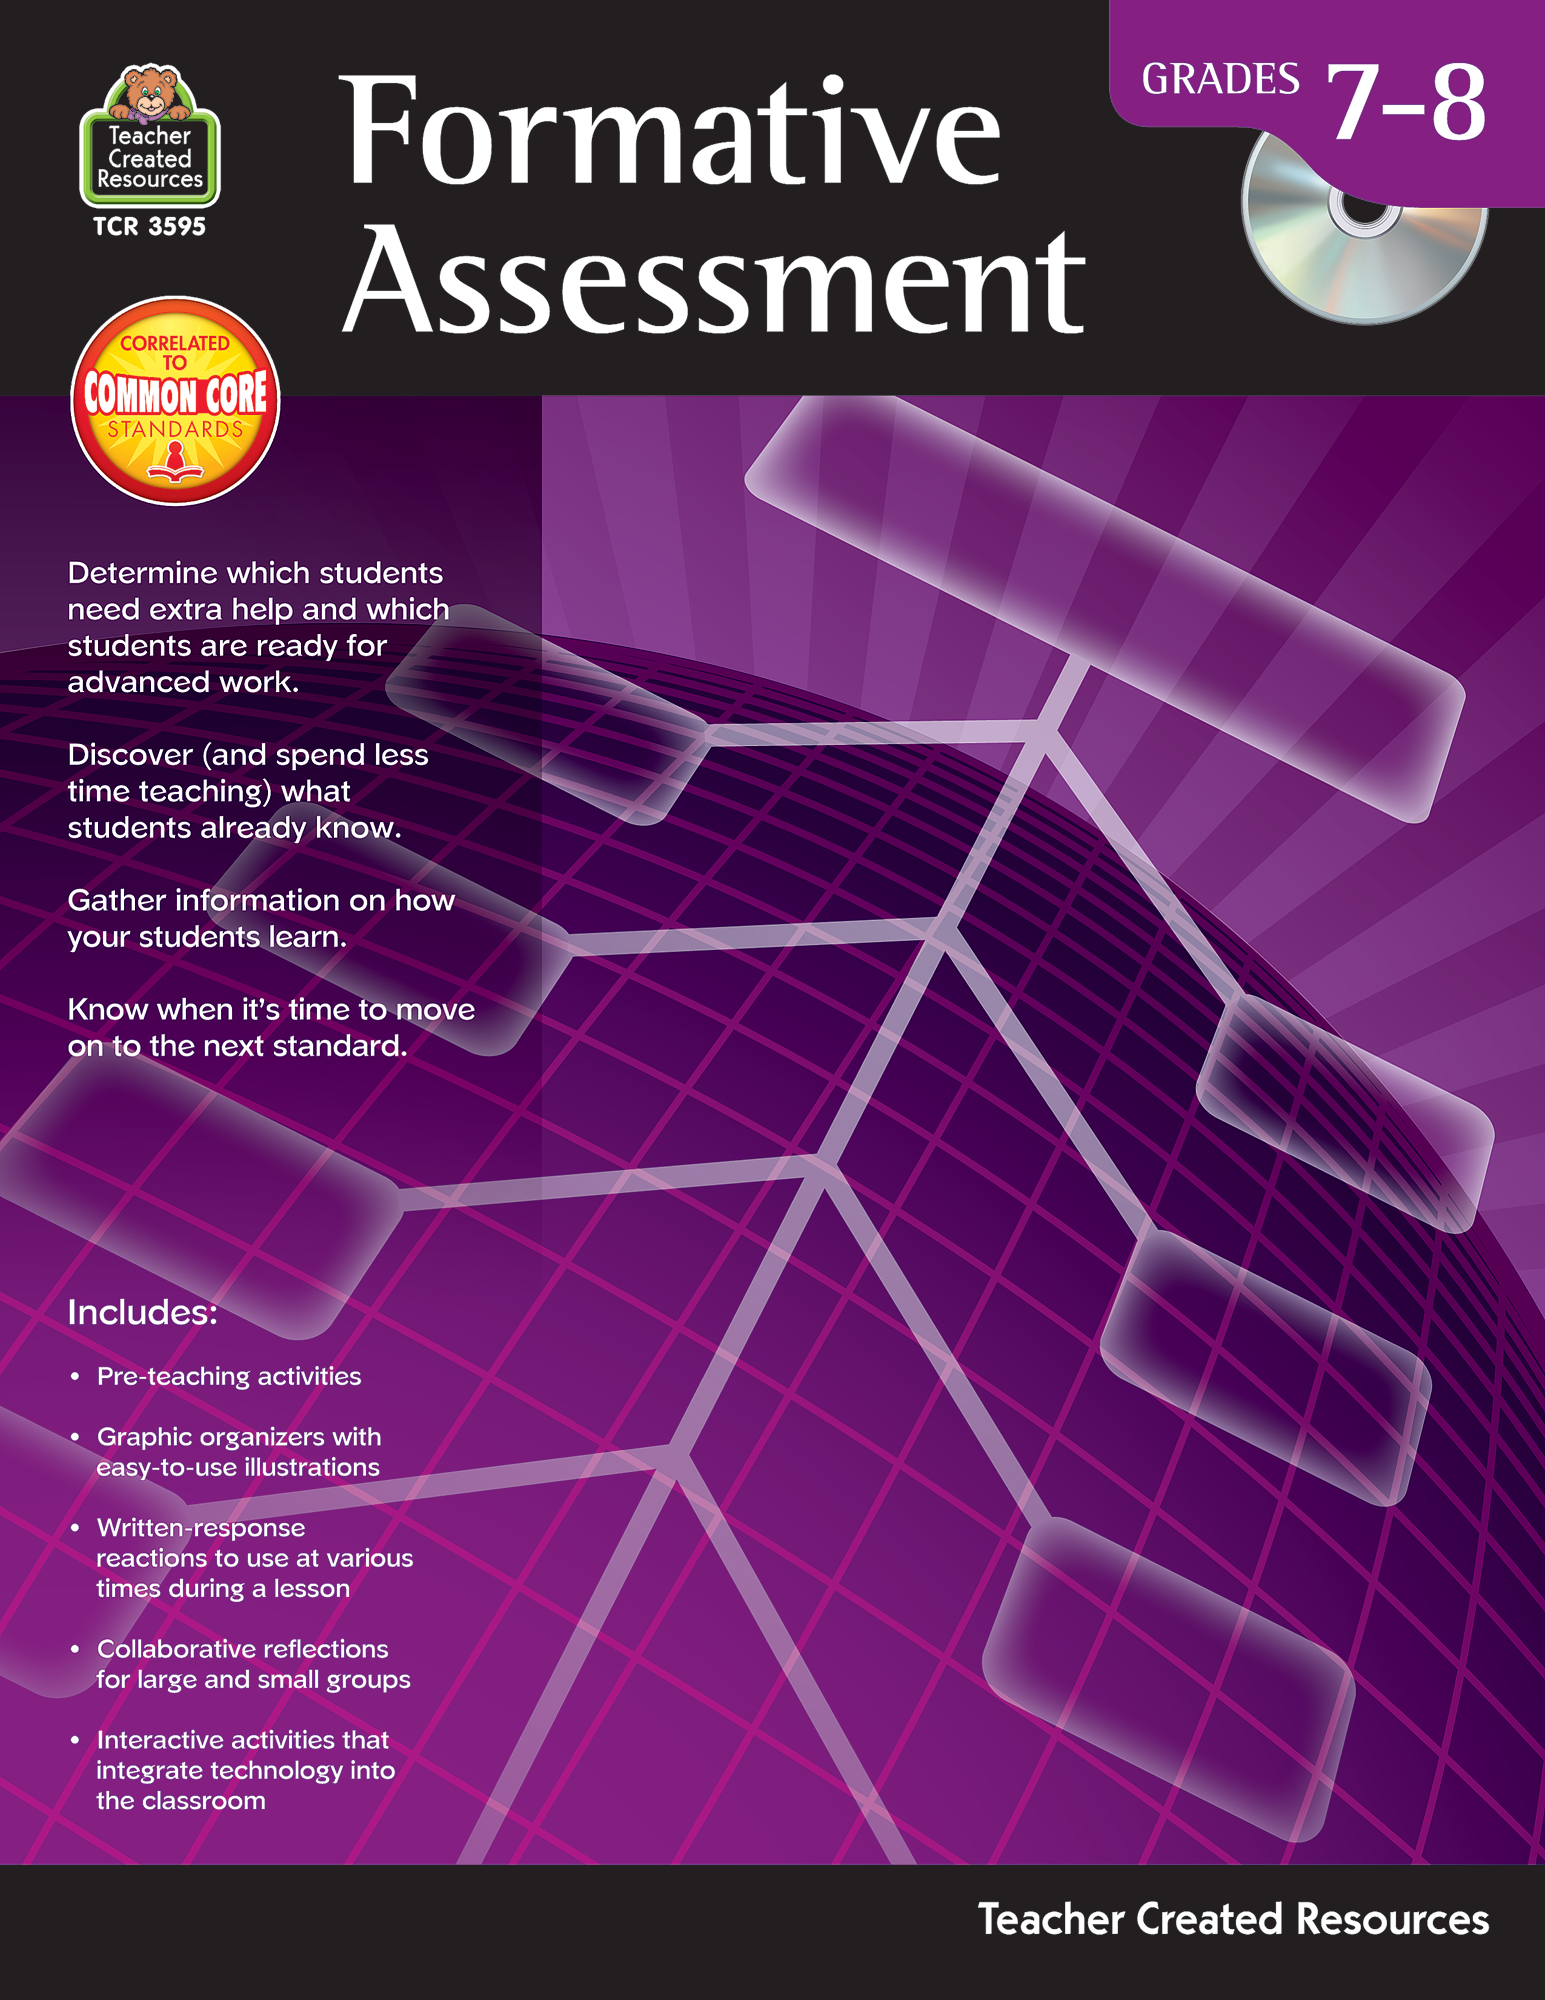 Formative Assessment Grade 7-8 - TCR3595 | Teacher Created Resources